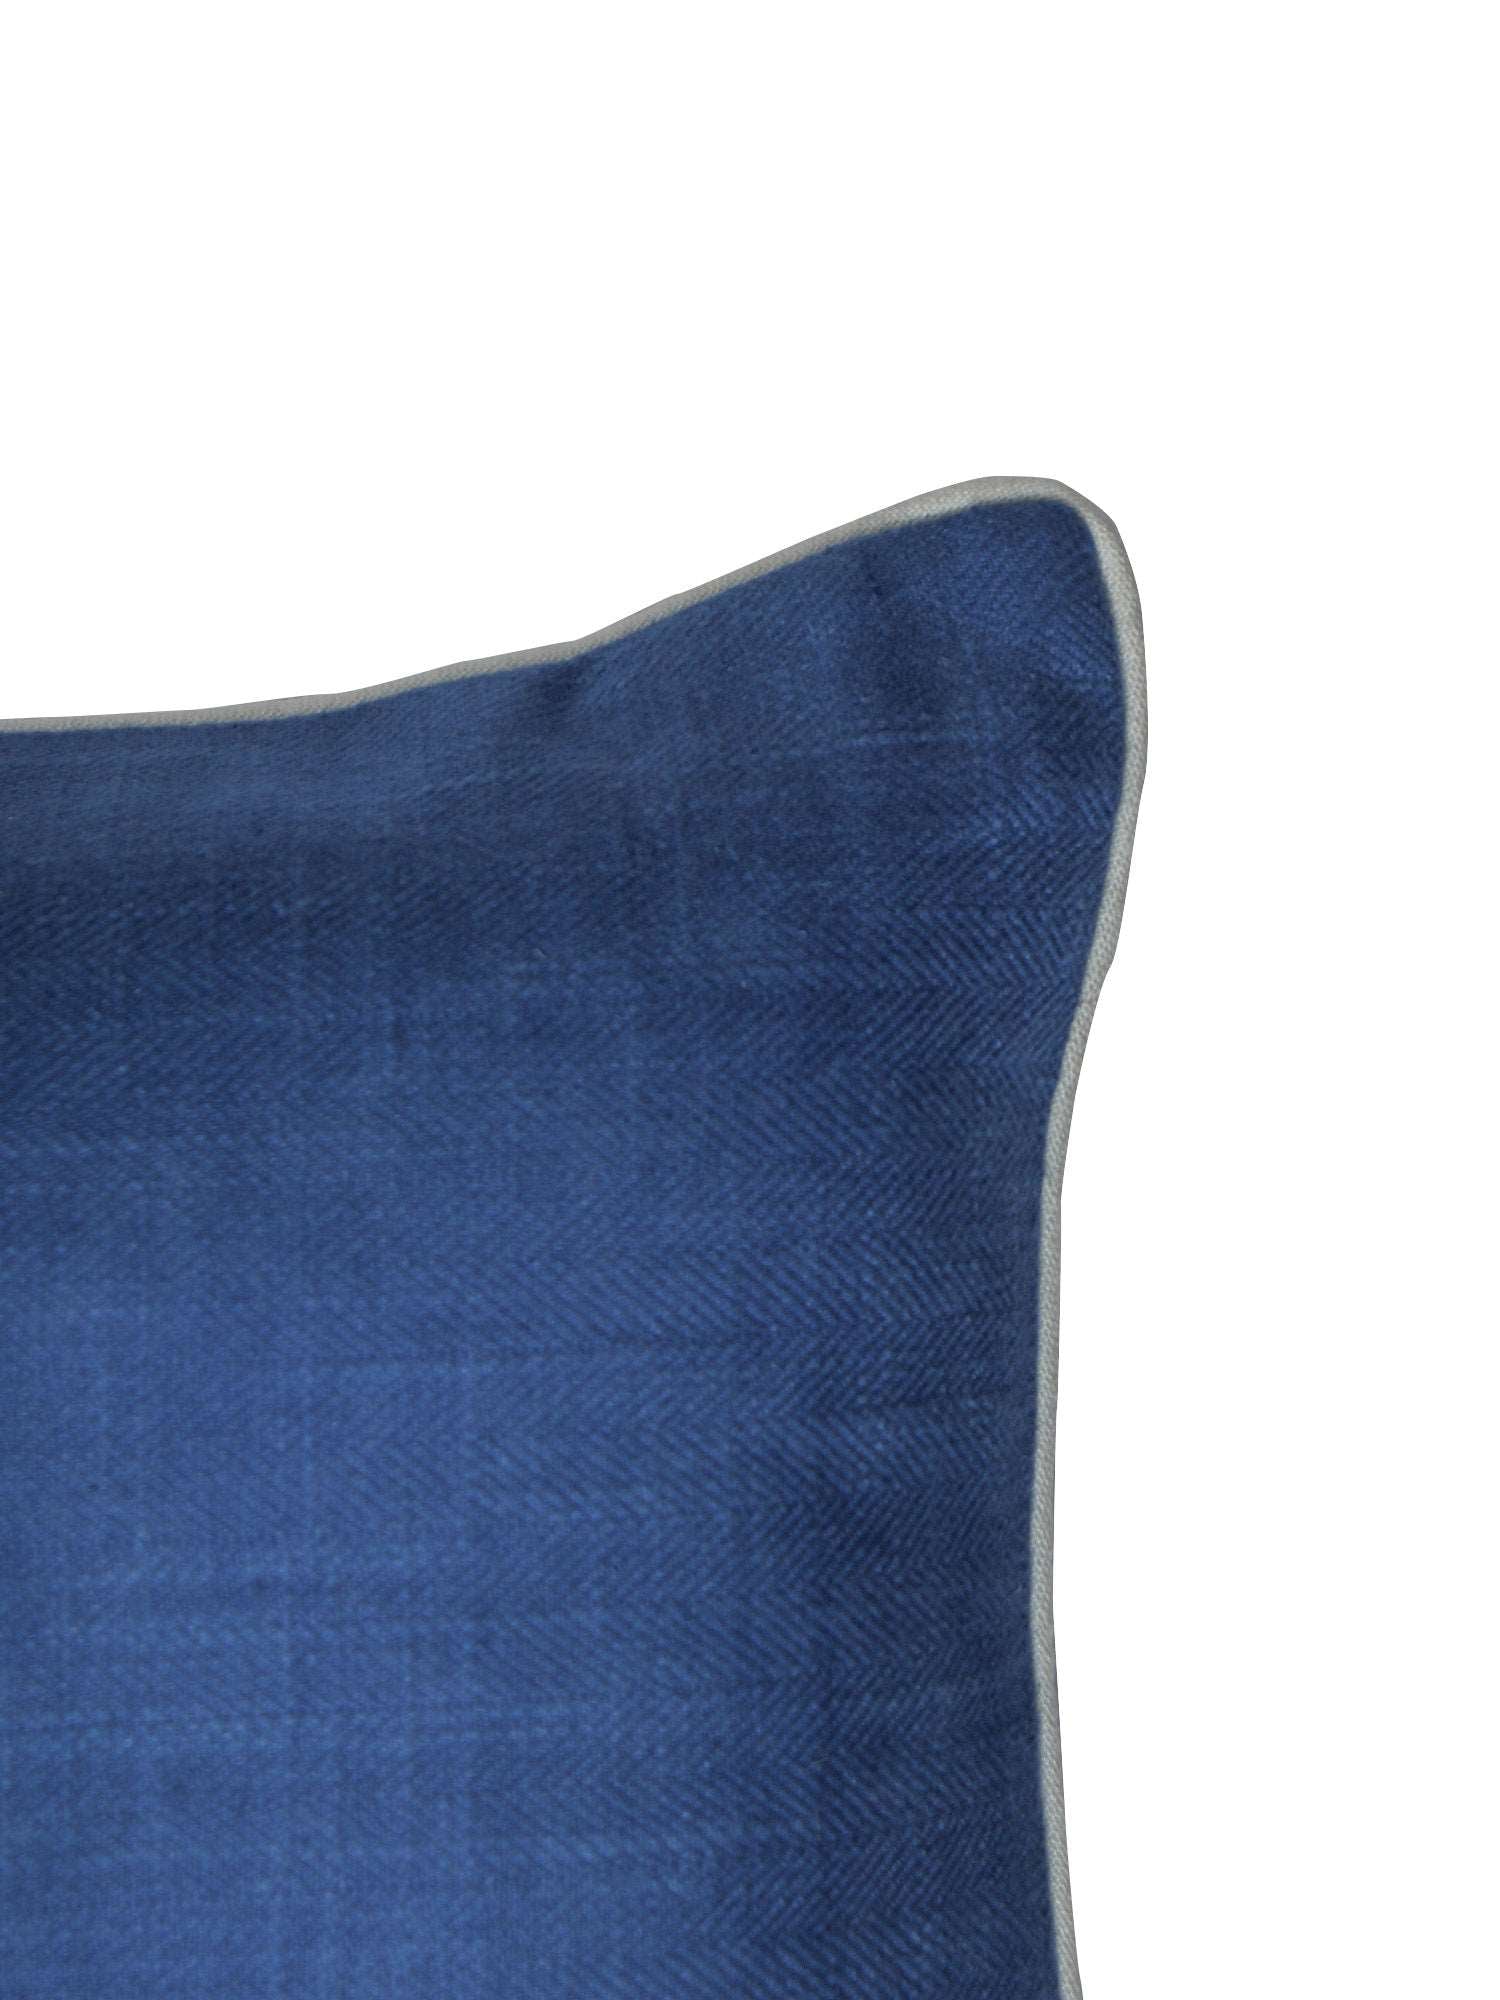 Cushion Cover for Sofa, Bed Cotton Blend |Self Textured with Cord Piping | Blue - 16x16in(40x40cm) (Pack of 1)